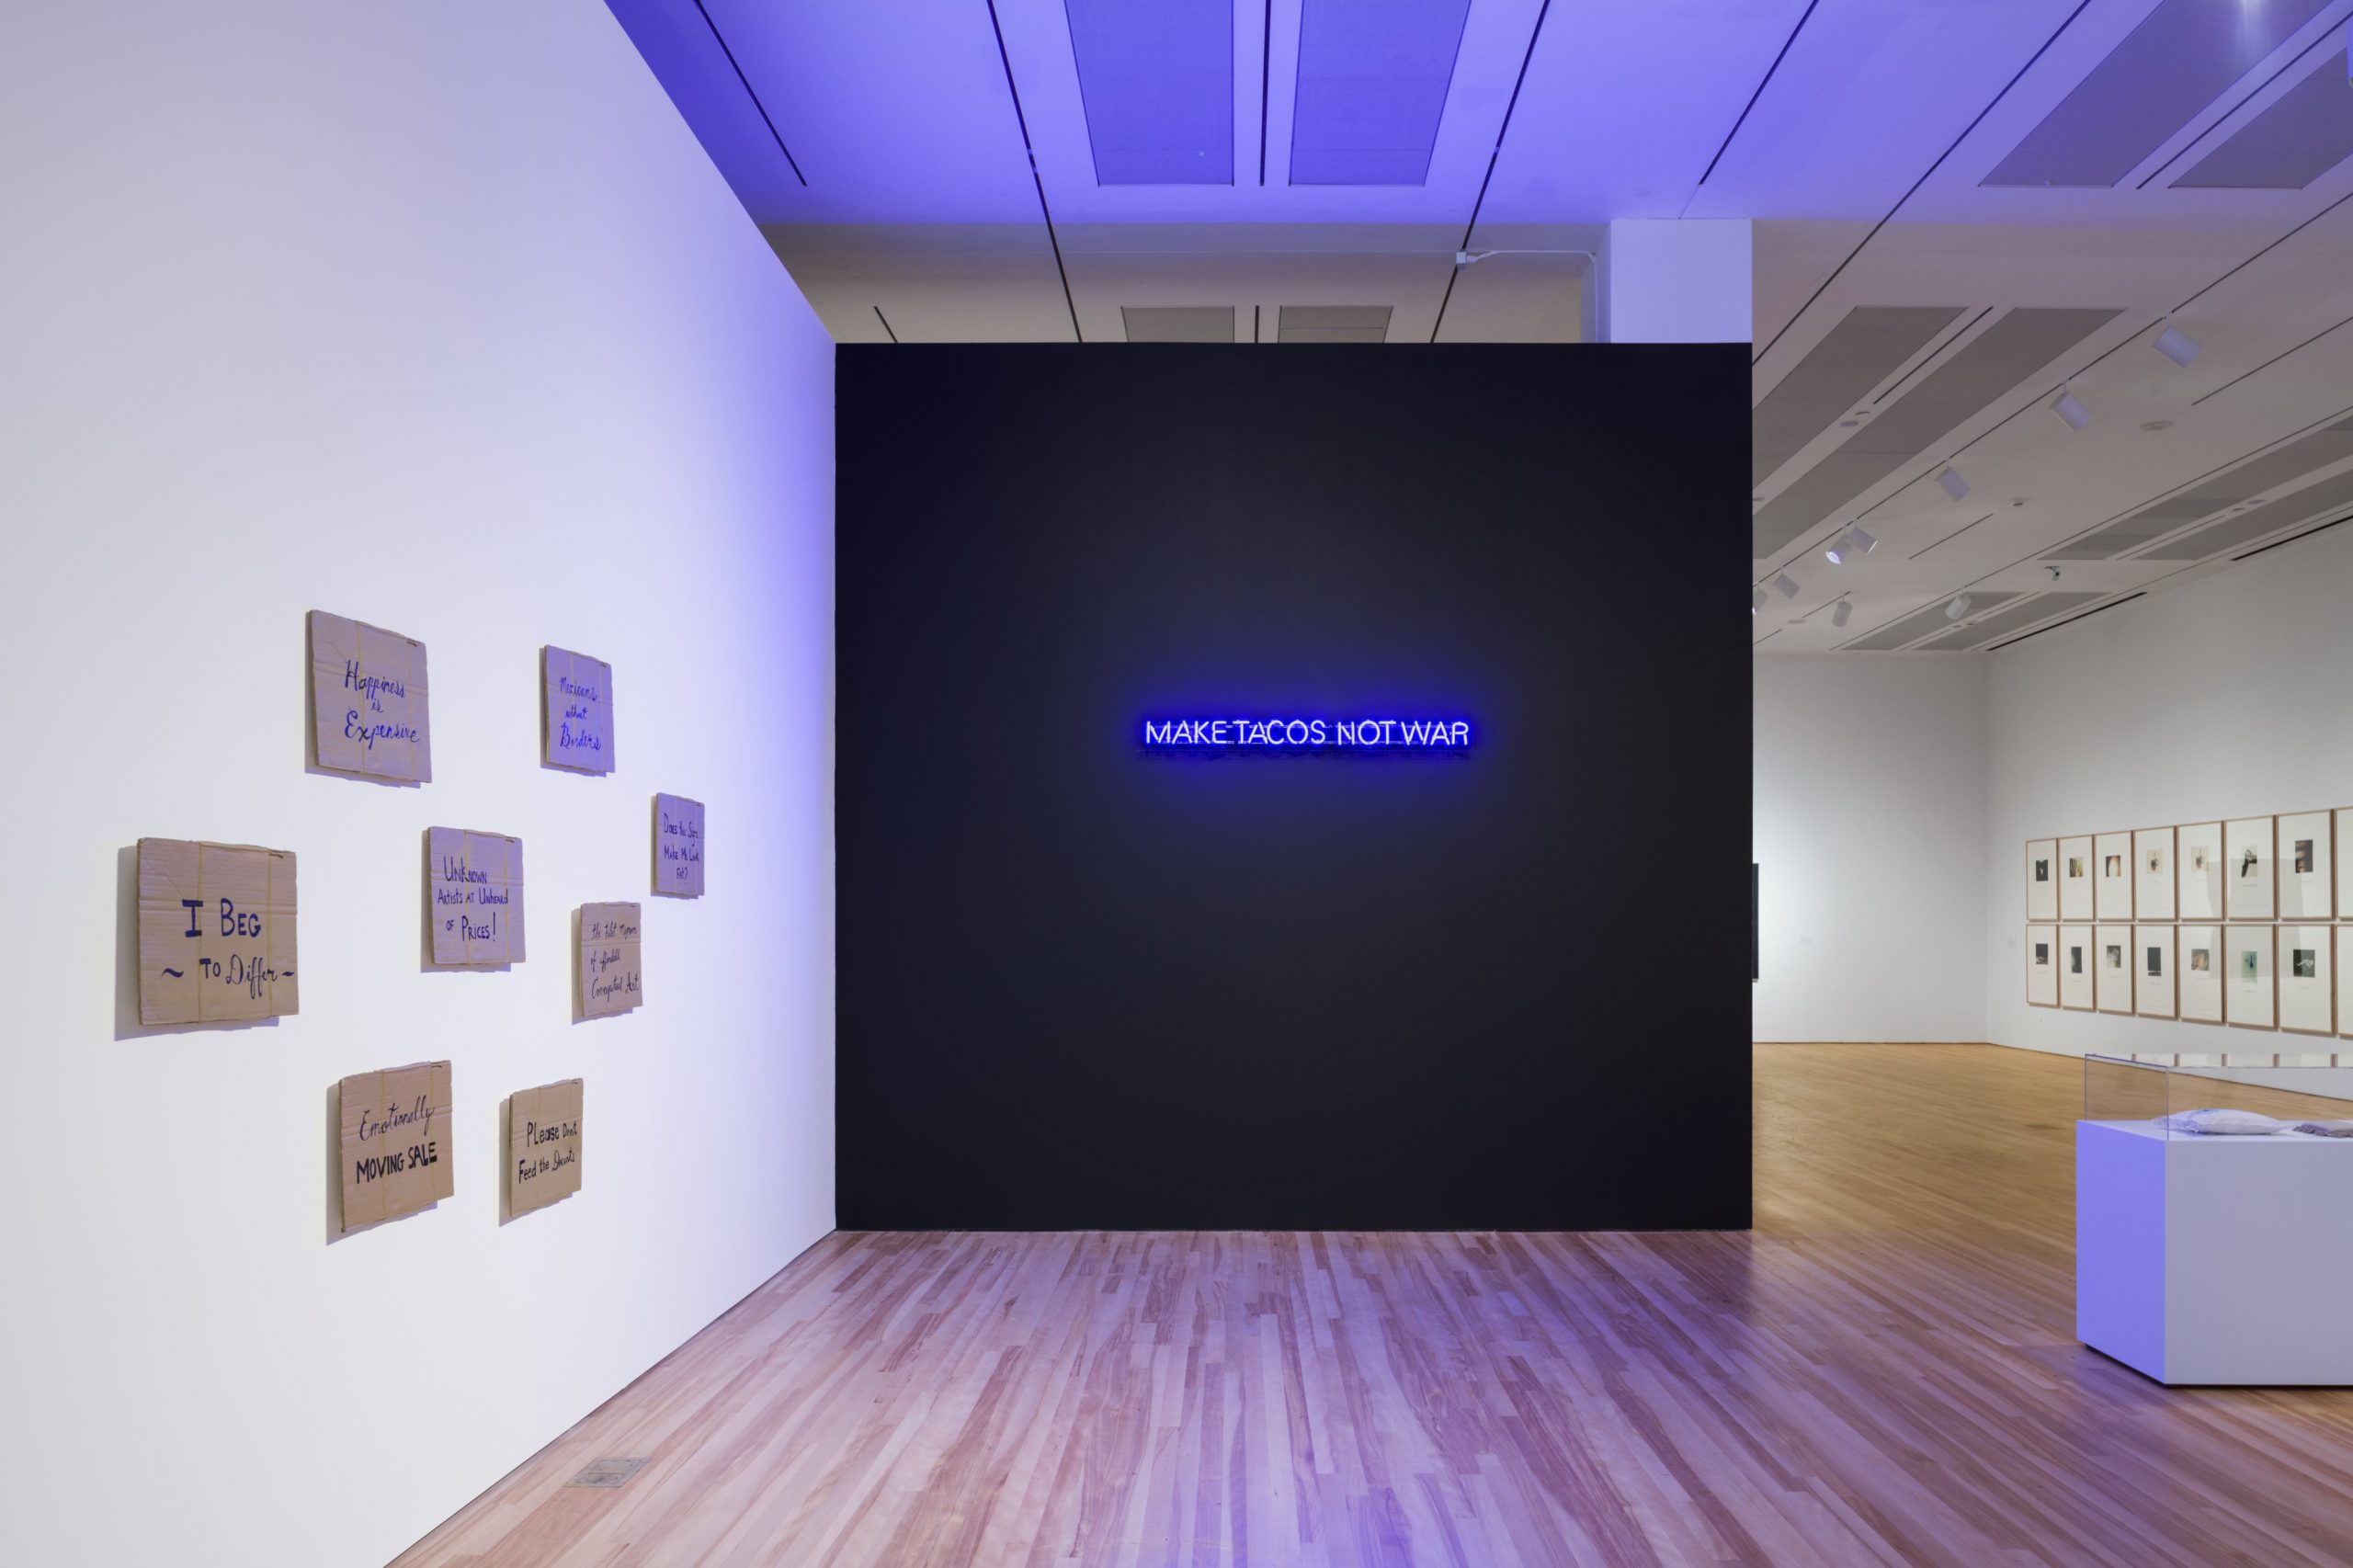 Exhibition view from Words/Matter: Latin American Art and Language at the Blanton featuring Alejandro Diaz